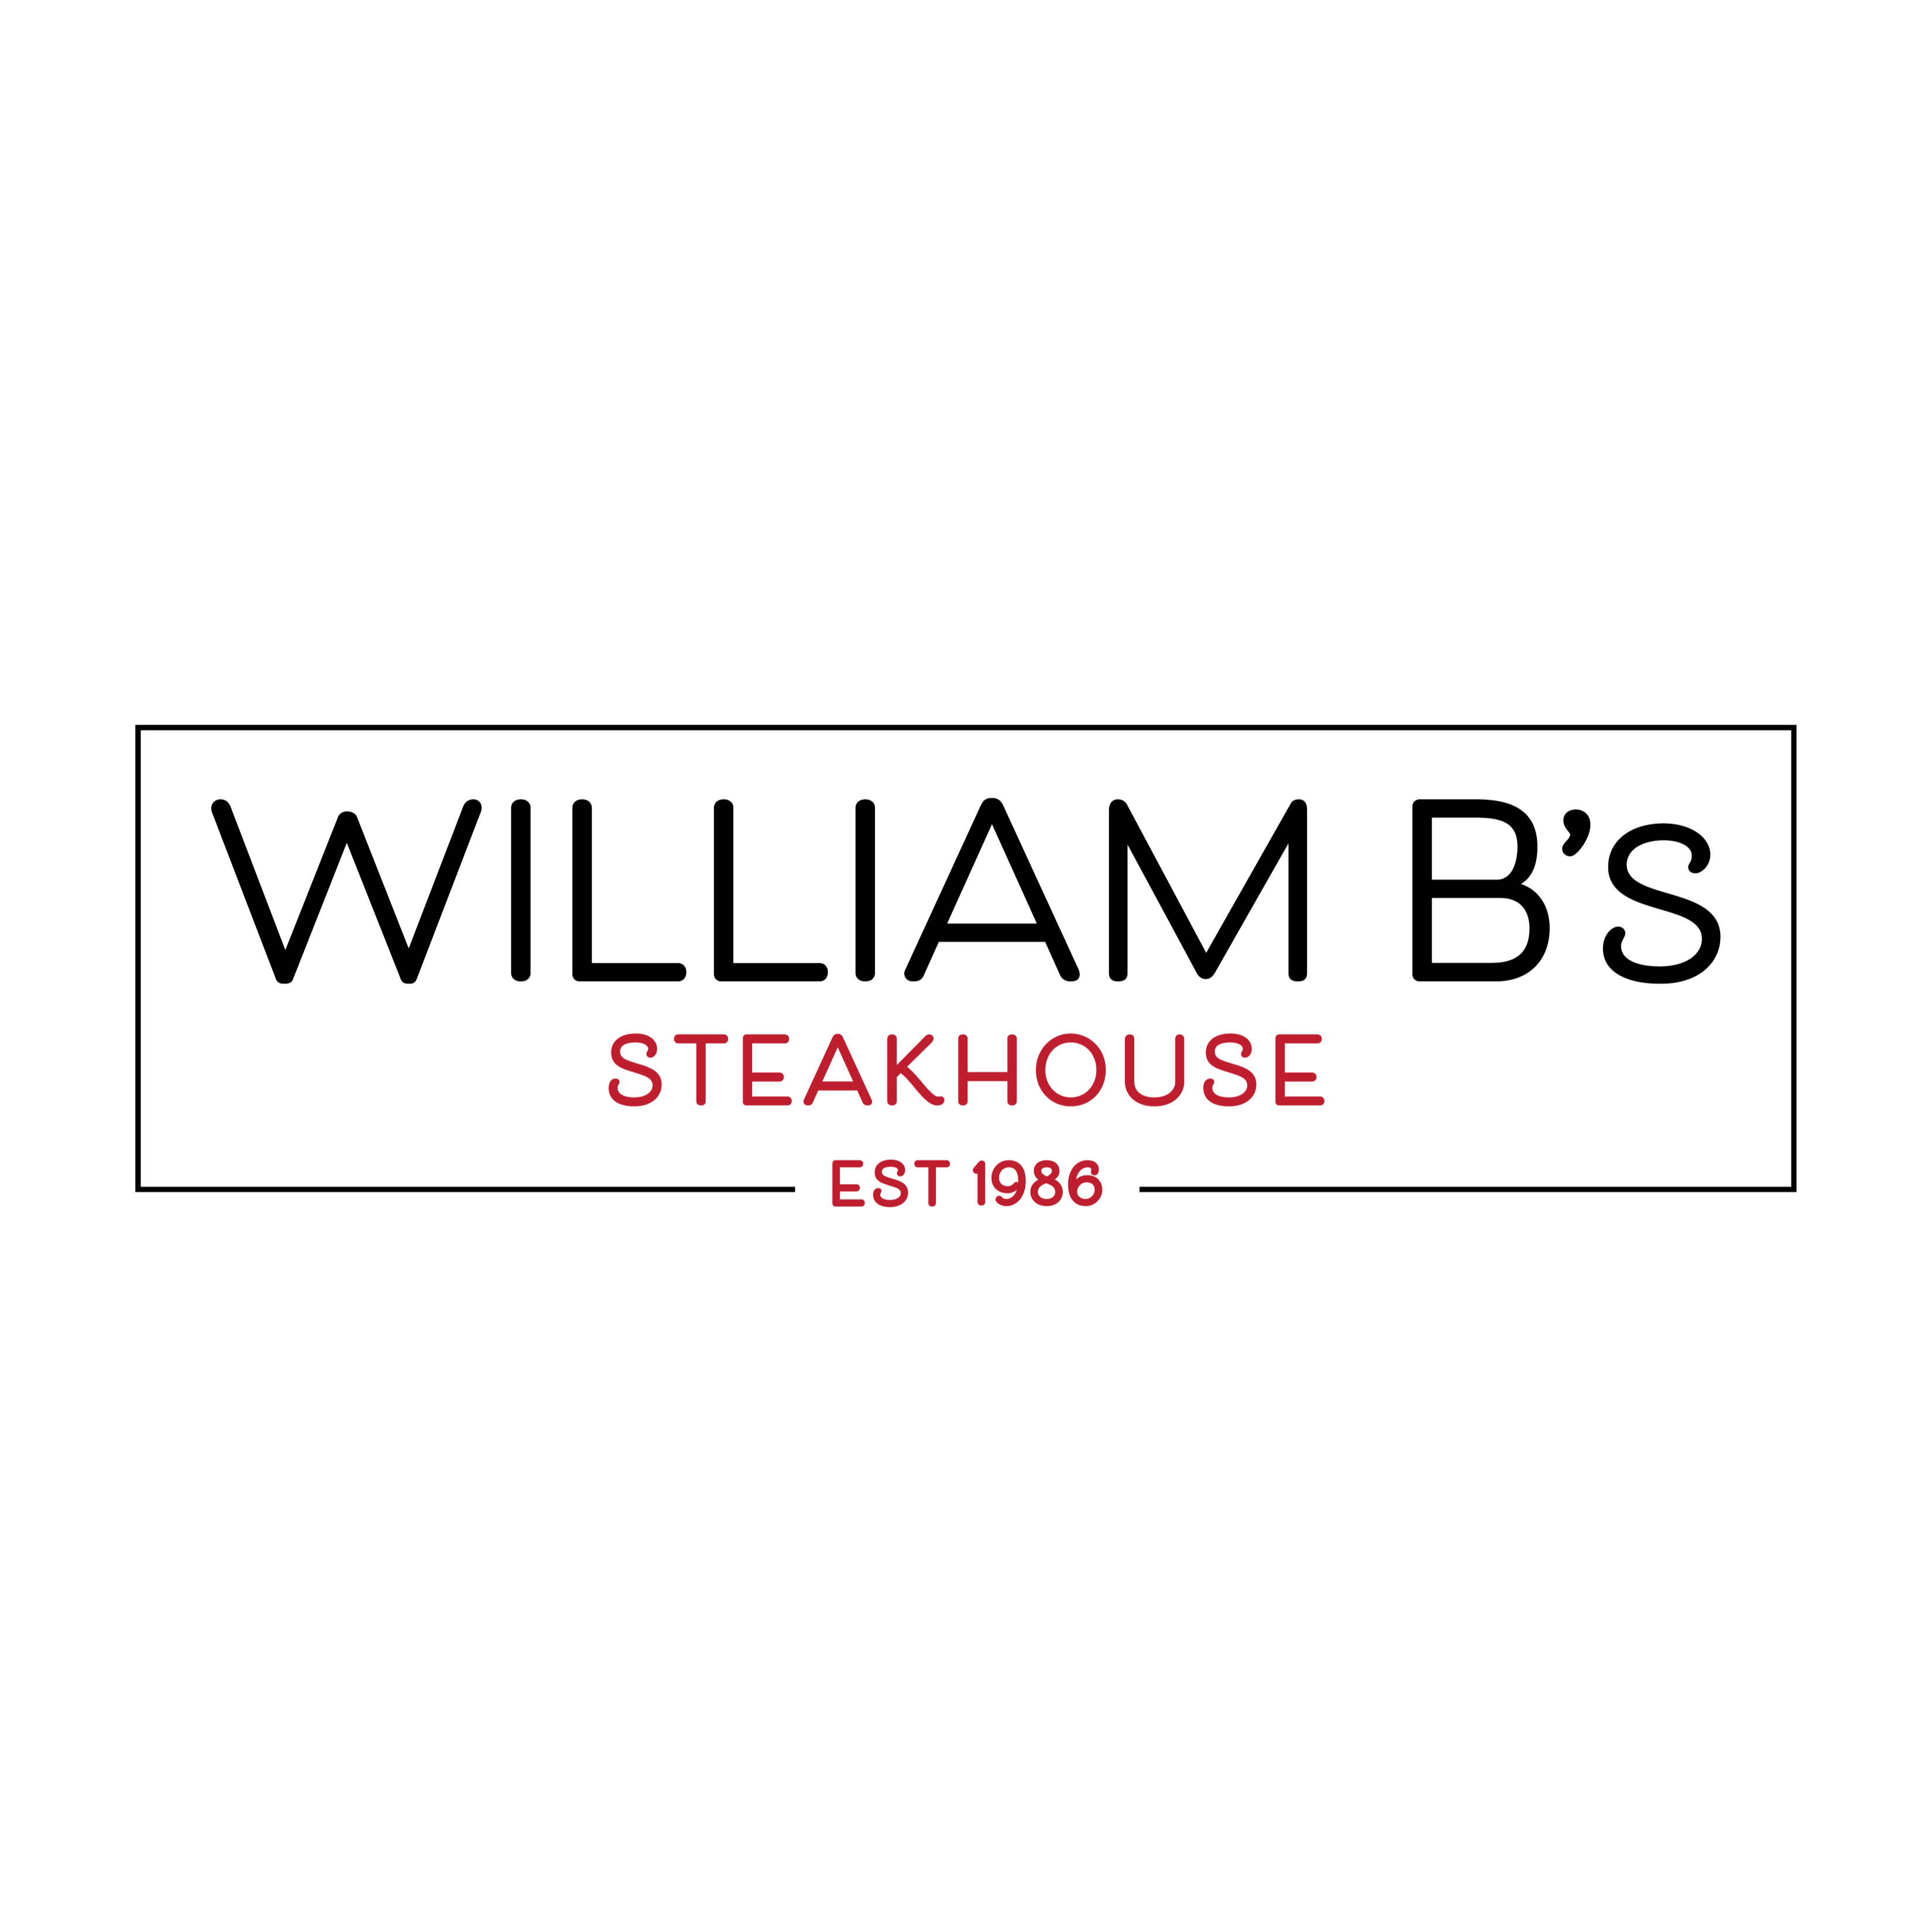 William B's Steakhouse - East Peoria, IL 61611 - (309)699-7711 | ShowMeLocal.com